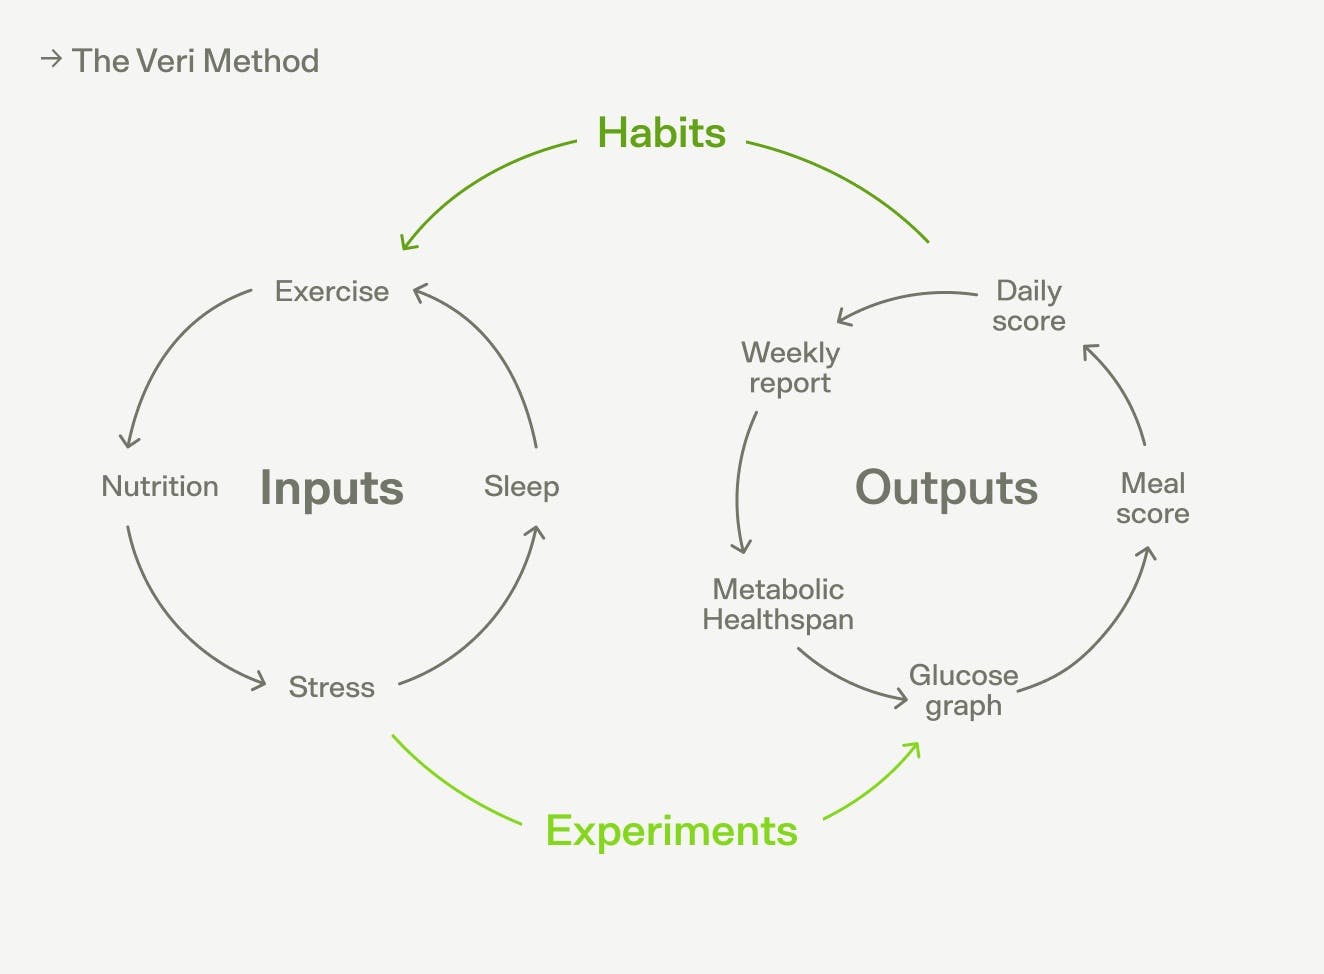 inputs and outputs of the veri method